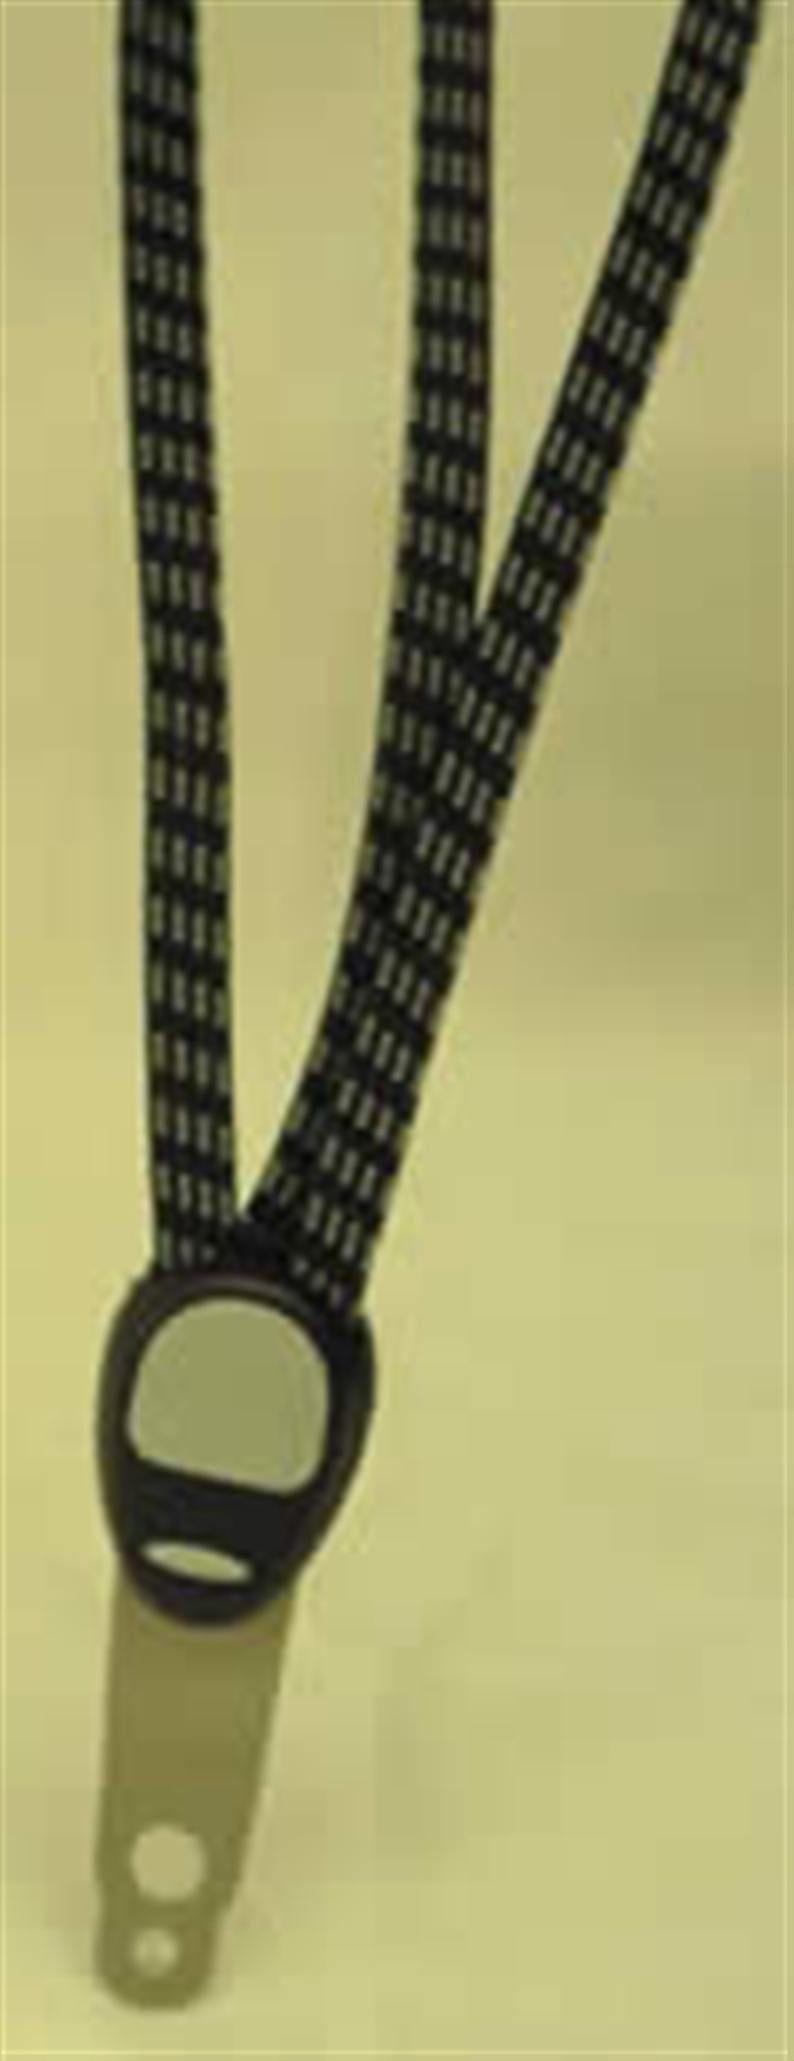 THESE EASY-TO-FIT TRIPLE STRAPS PROVIDE A SECURE BASE TO CARRY A MULTITUDE OF ITEMS ON YOUR REAR